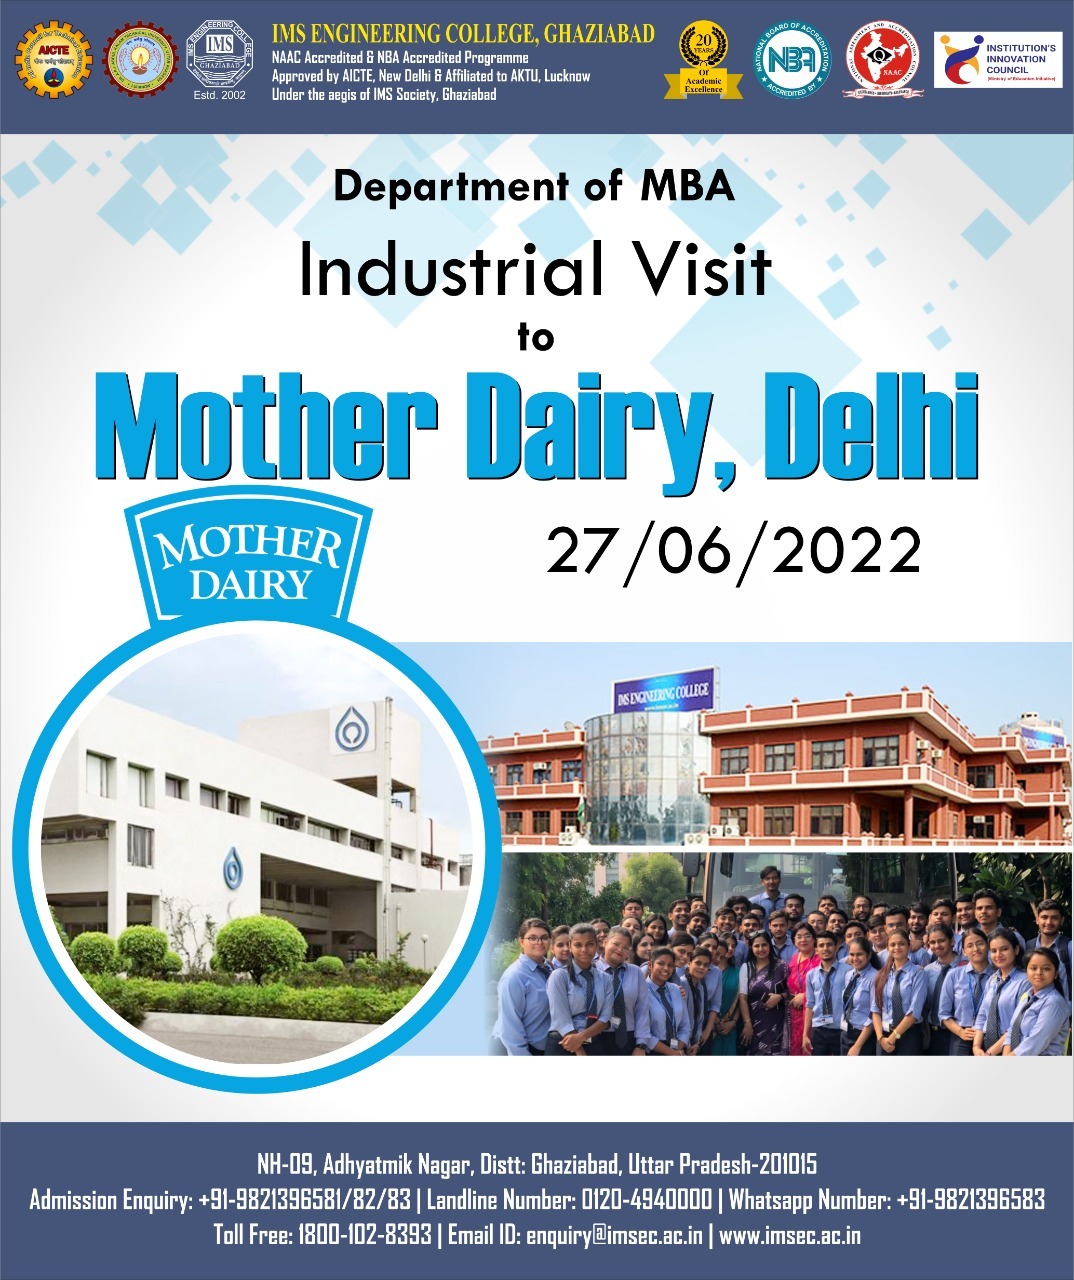 MBA Department has organized an industry visit at Mother Dairy